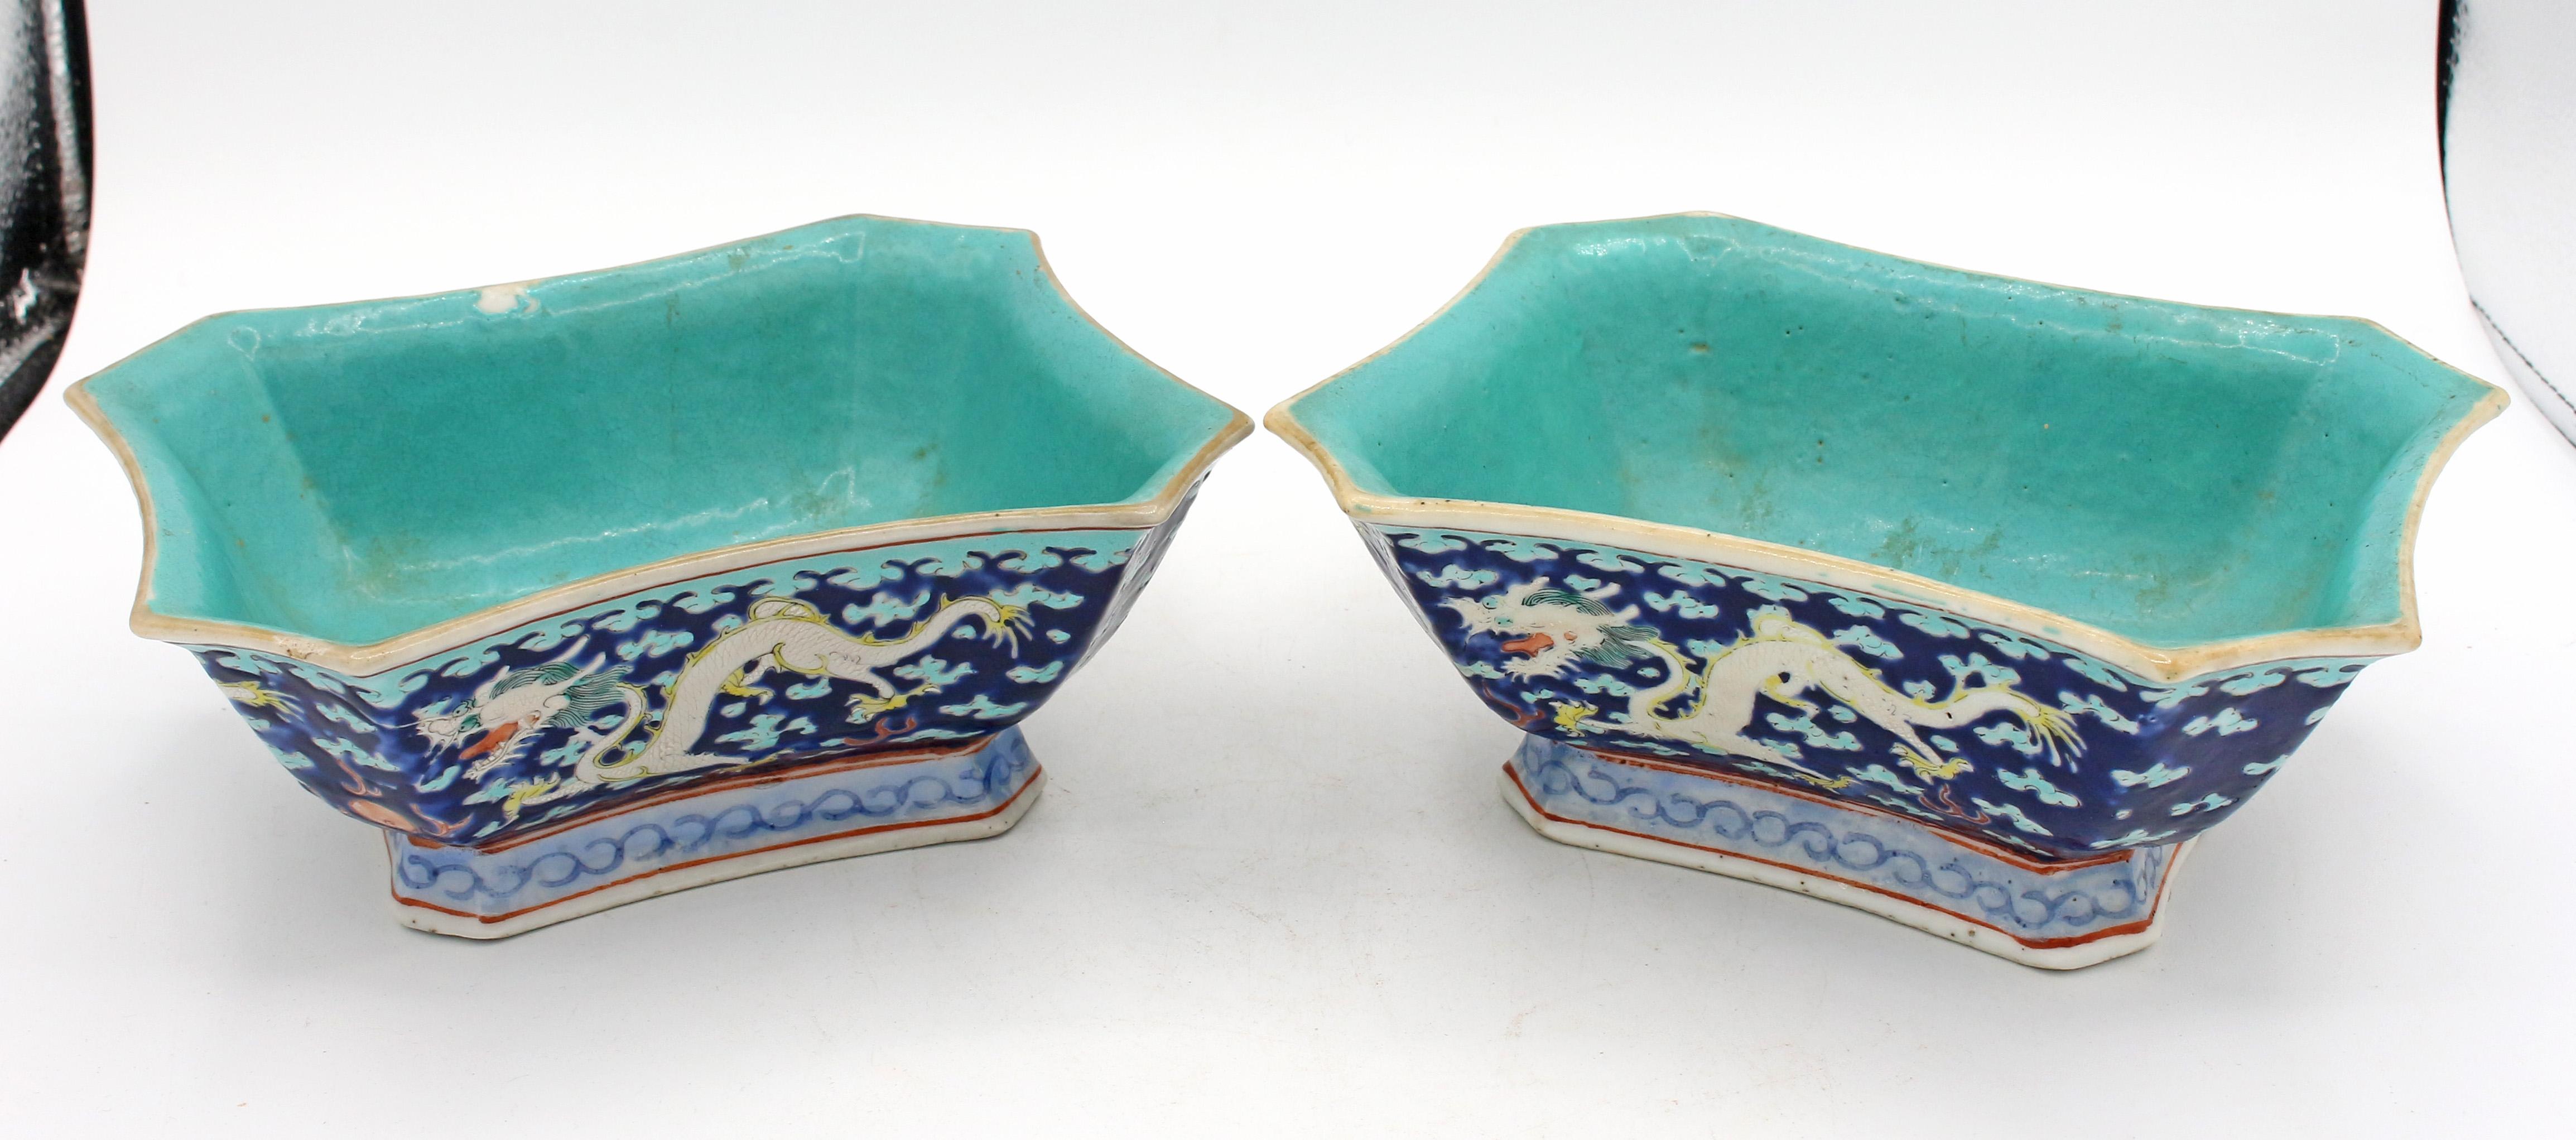 Late 19th-early 20th century Pair of Stacking Shaped Rectangular Bowls, Chinese. Cobalt ground with dragon decoration. Turquoise bowl, bottom & border. Original turquoise glaze miss spot on one; also with small rim chip. Fine enamelling & incising